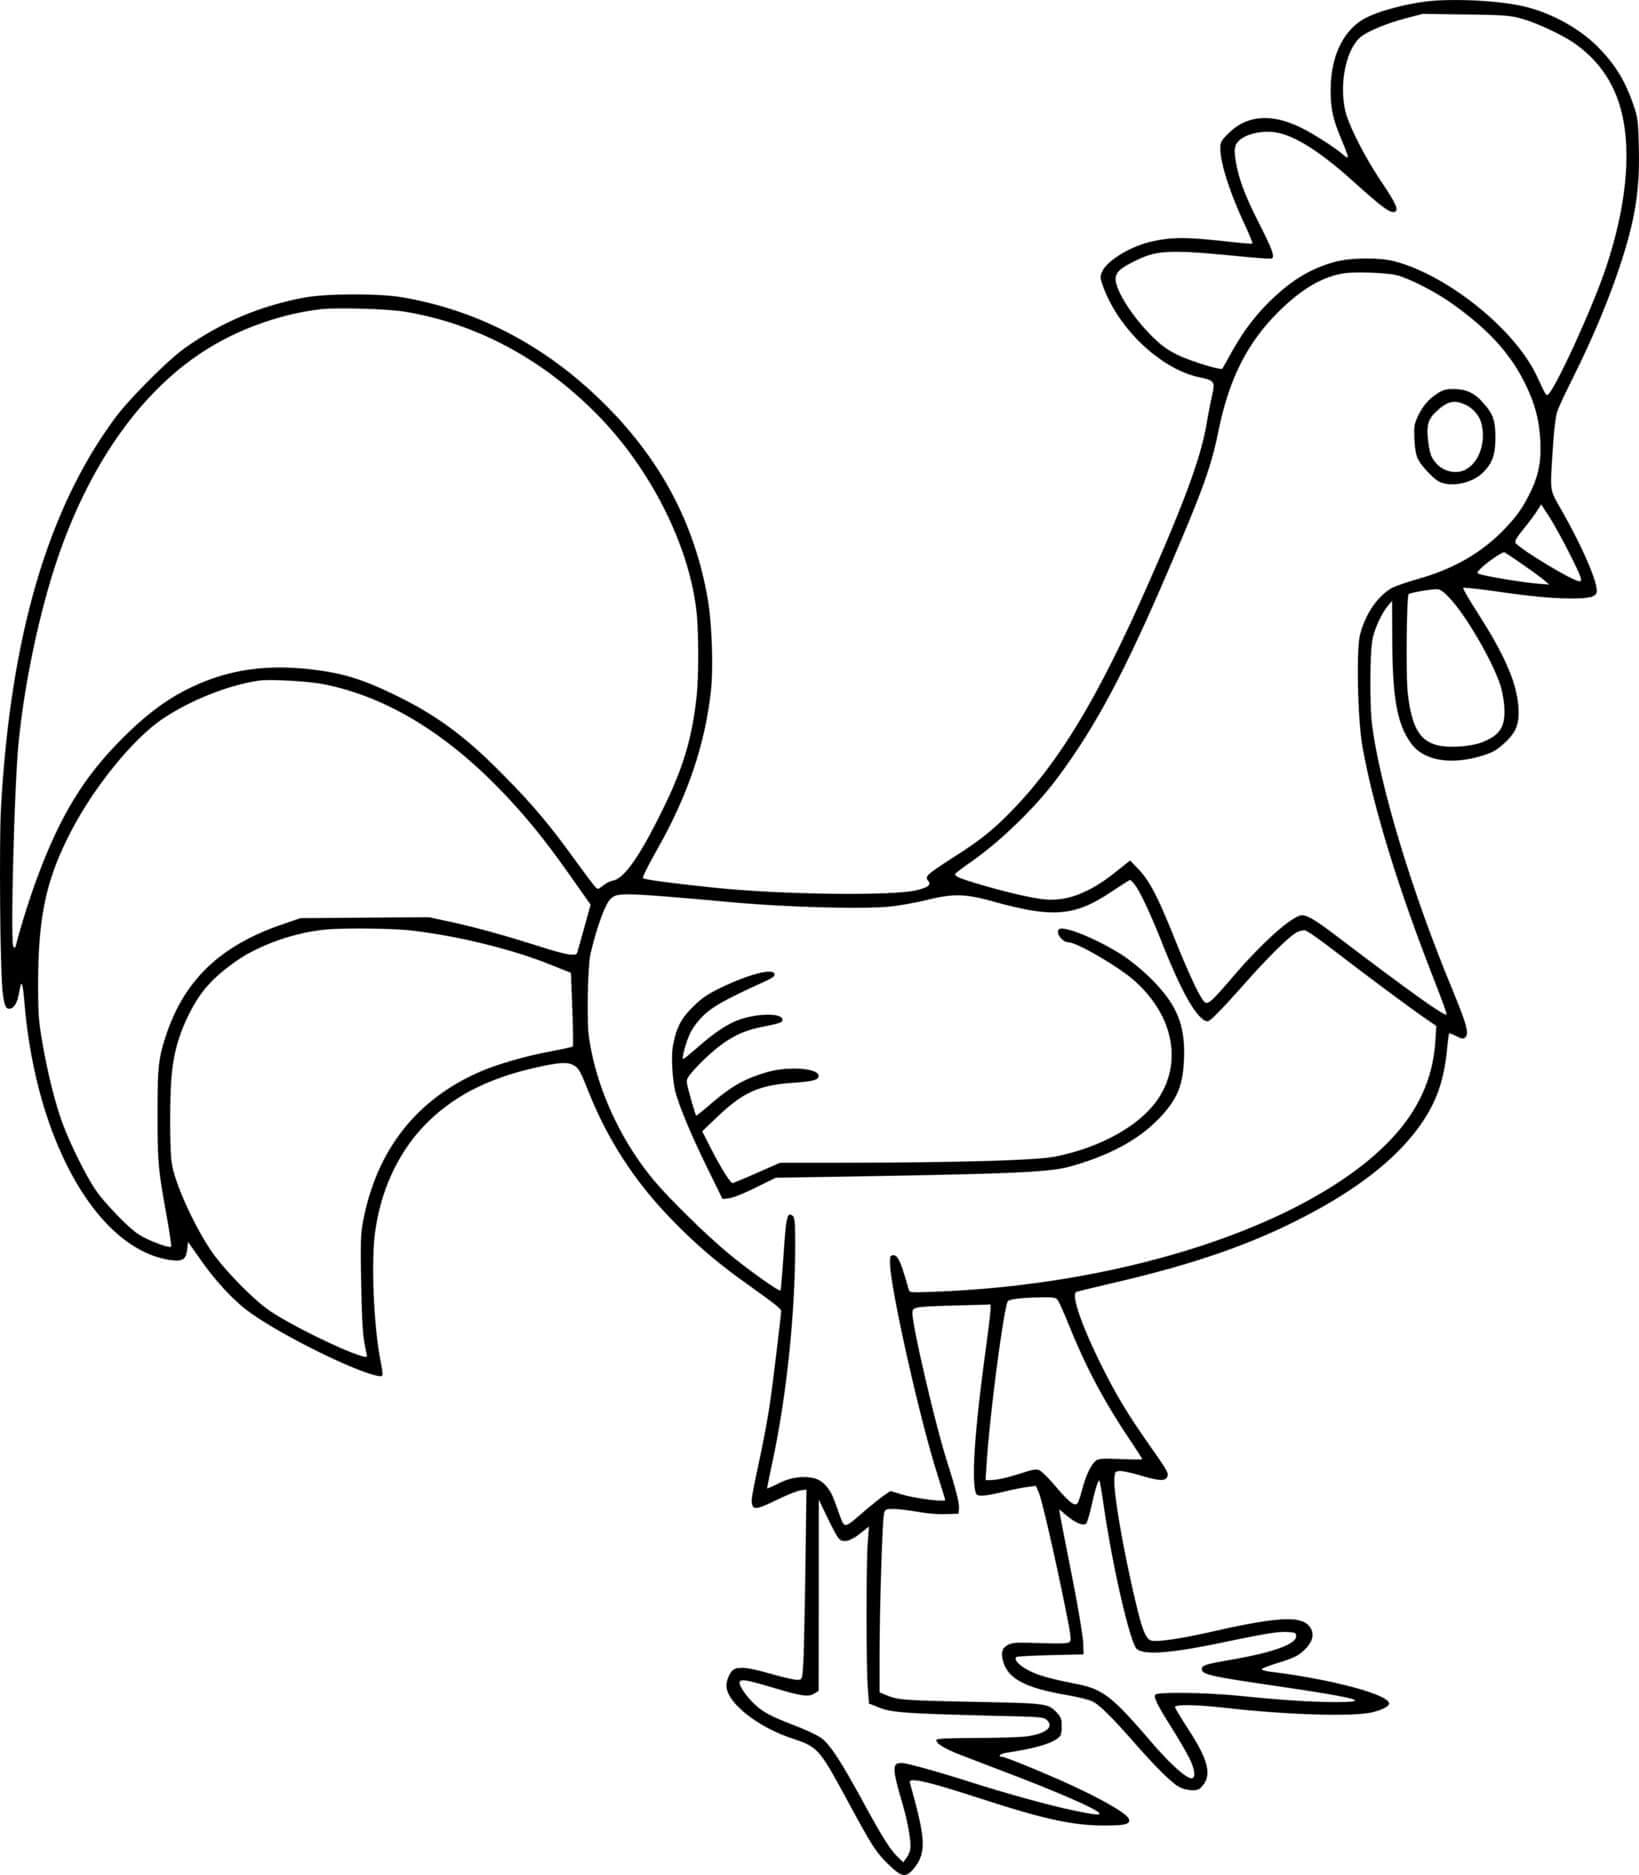 Simple Cartoon Rooster Coloring Page